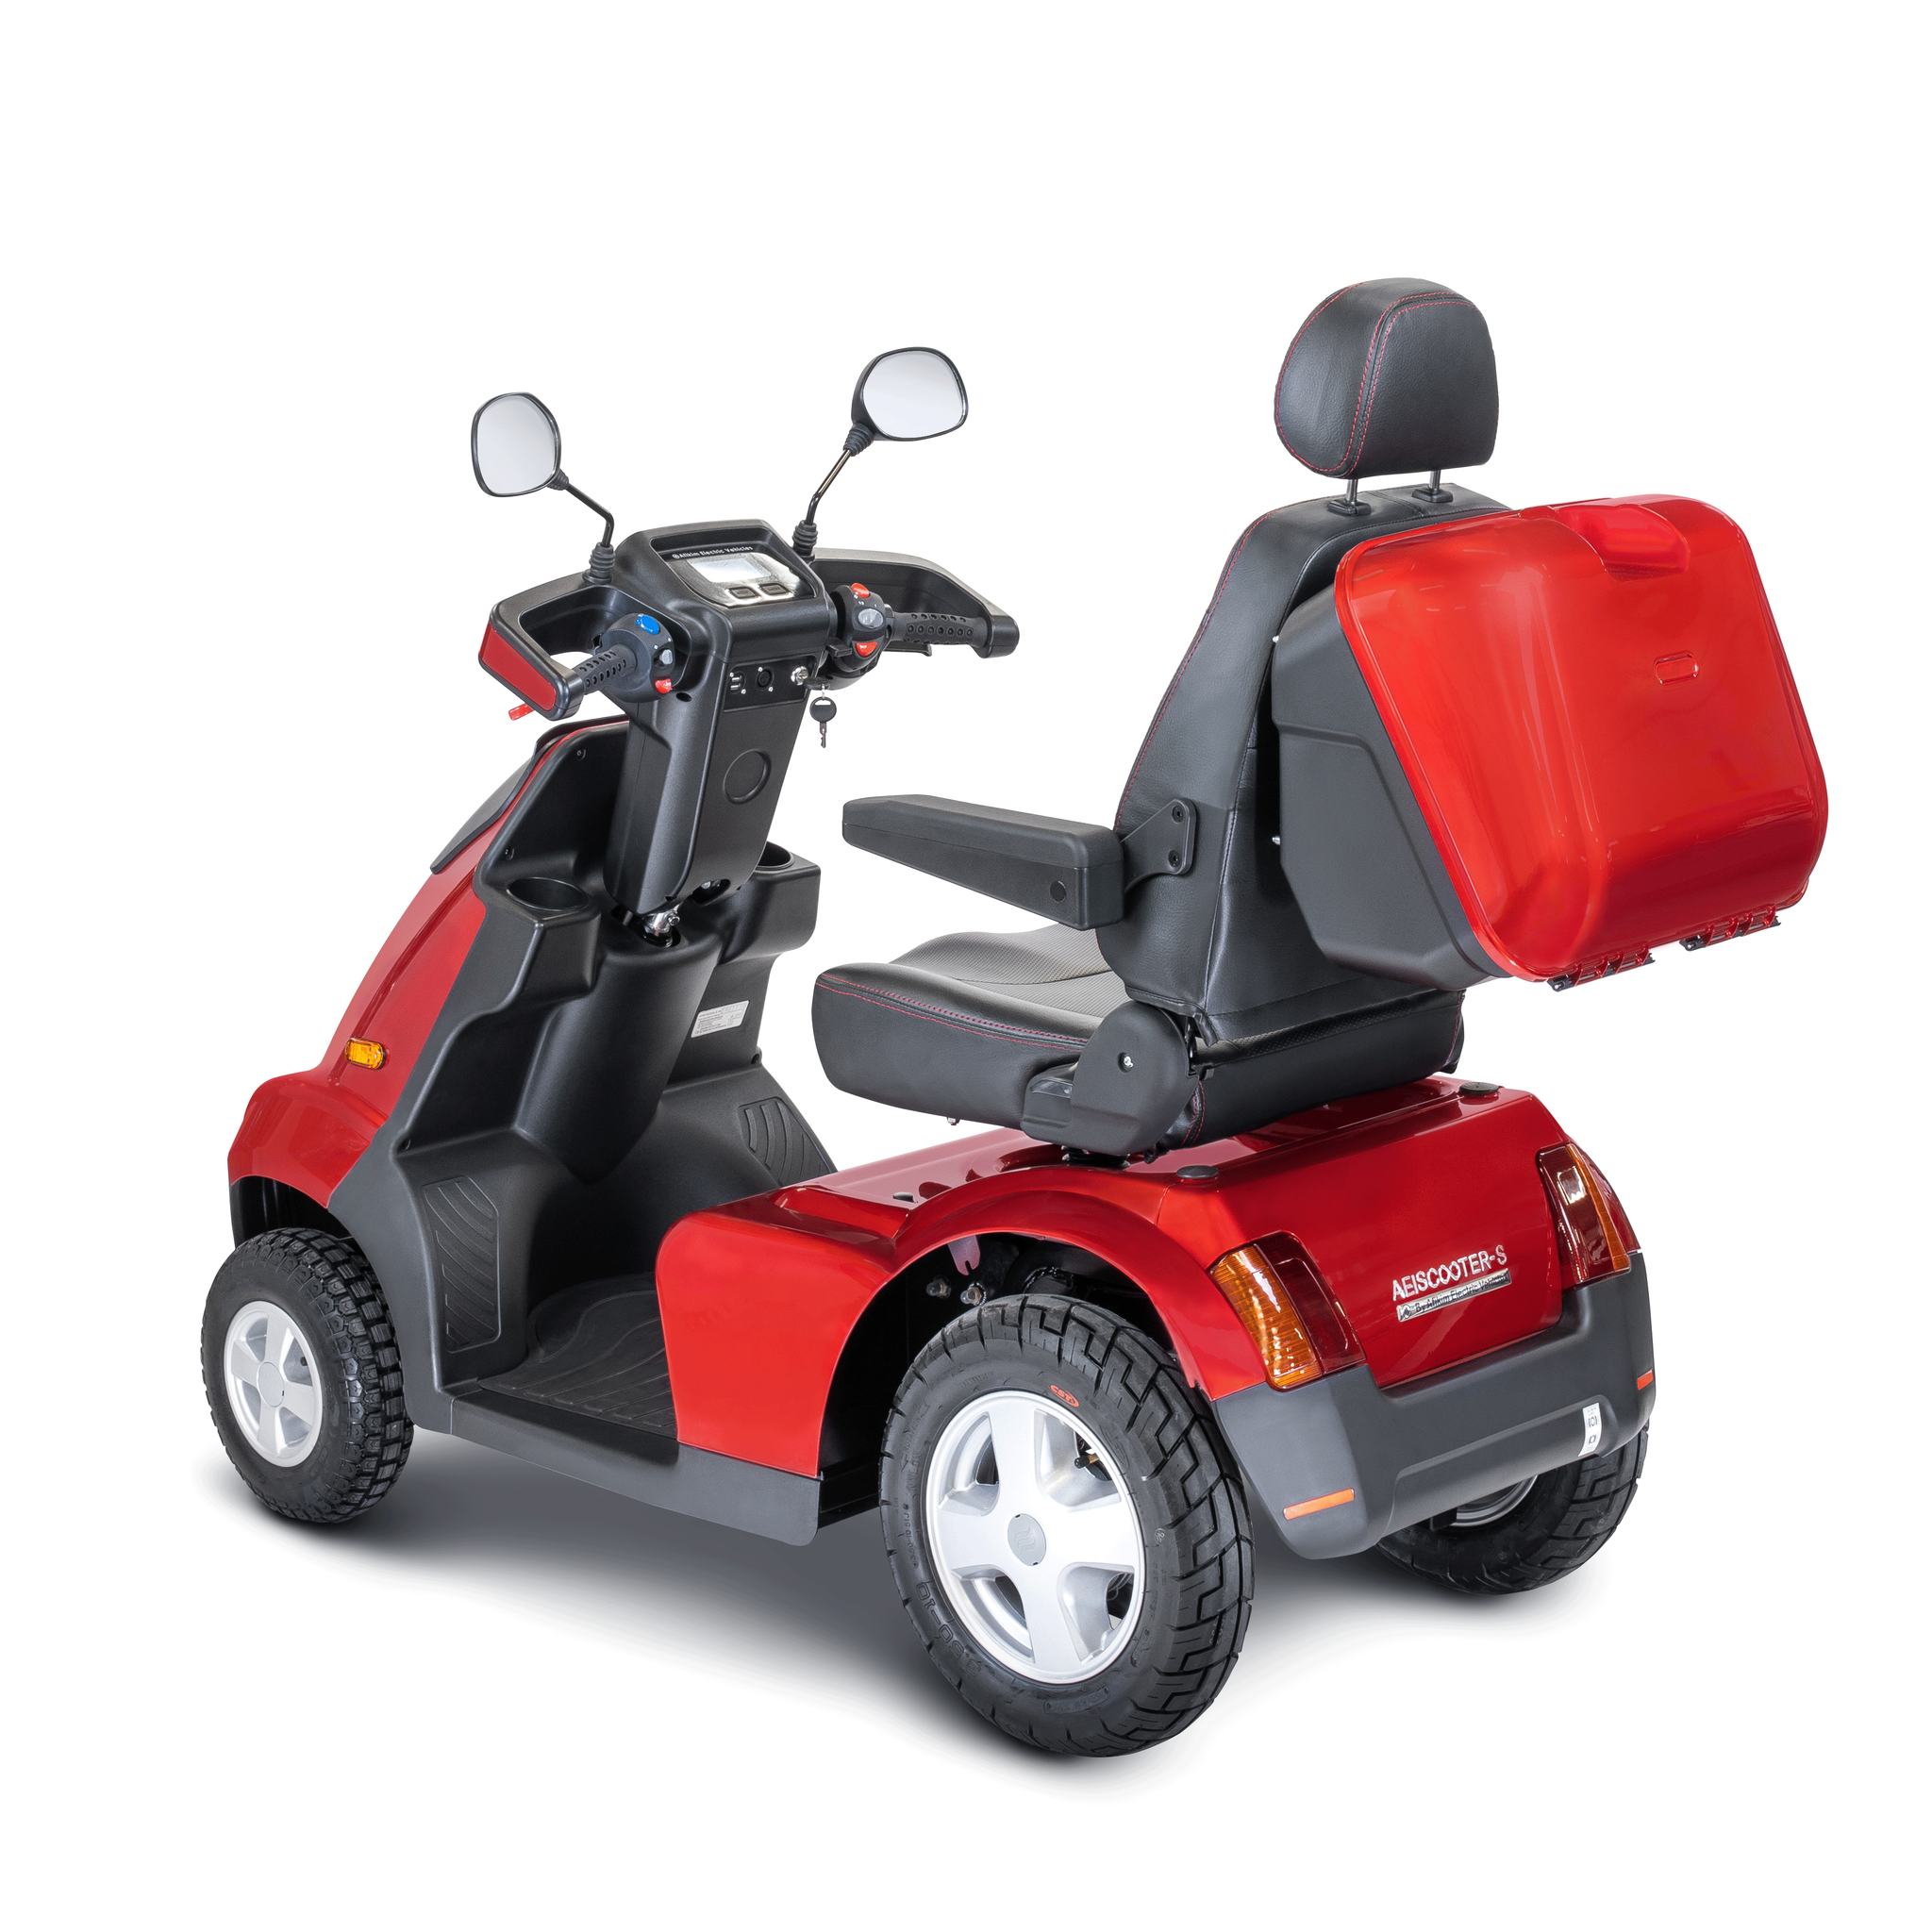 AfiScooter S4 Recreational Mobility Scooter